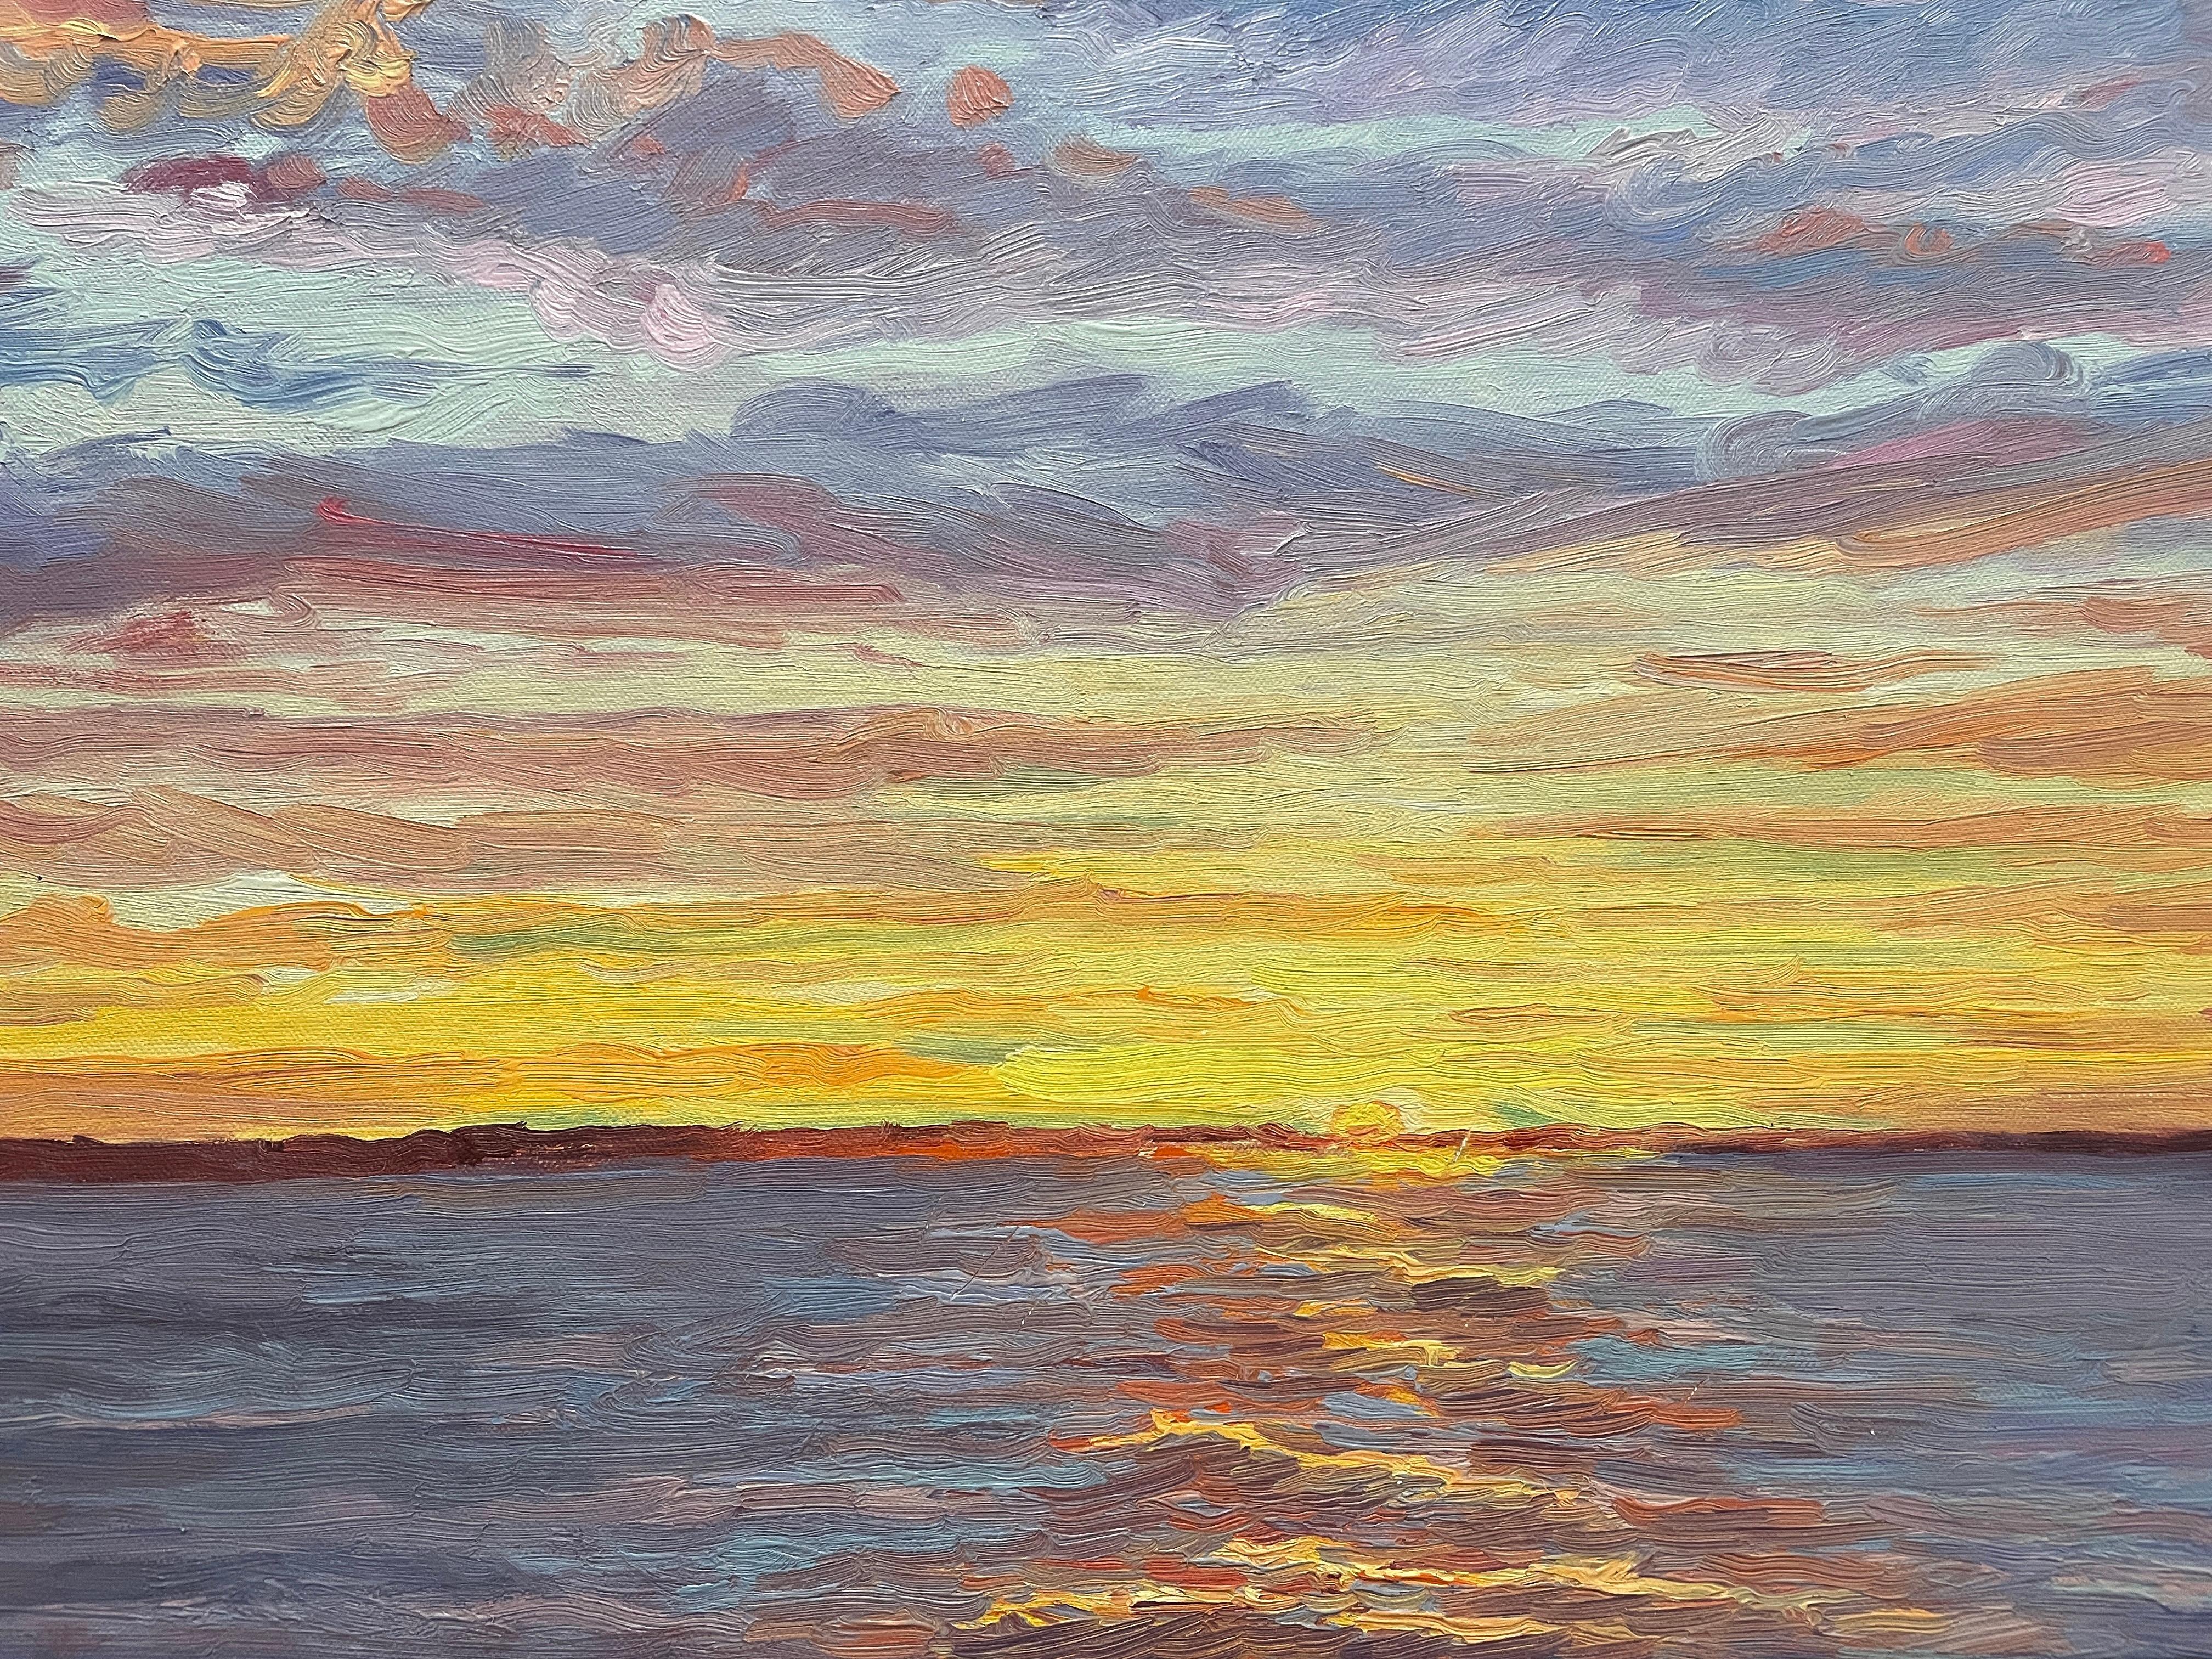 Nature's Glory at End of Day. Title - Sunset over Gardiners Bay - Brown Landscape Painting by Carl Scorza